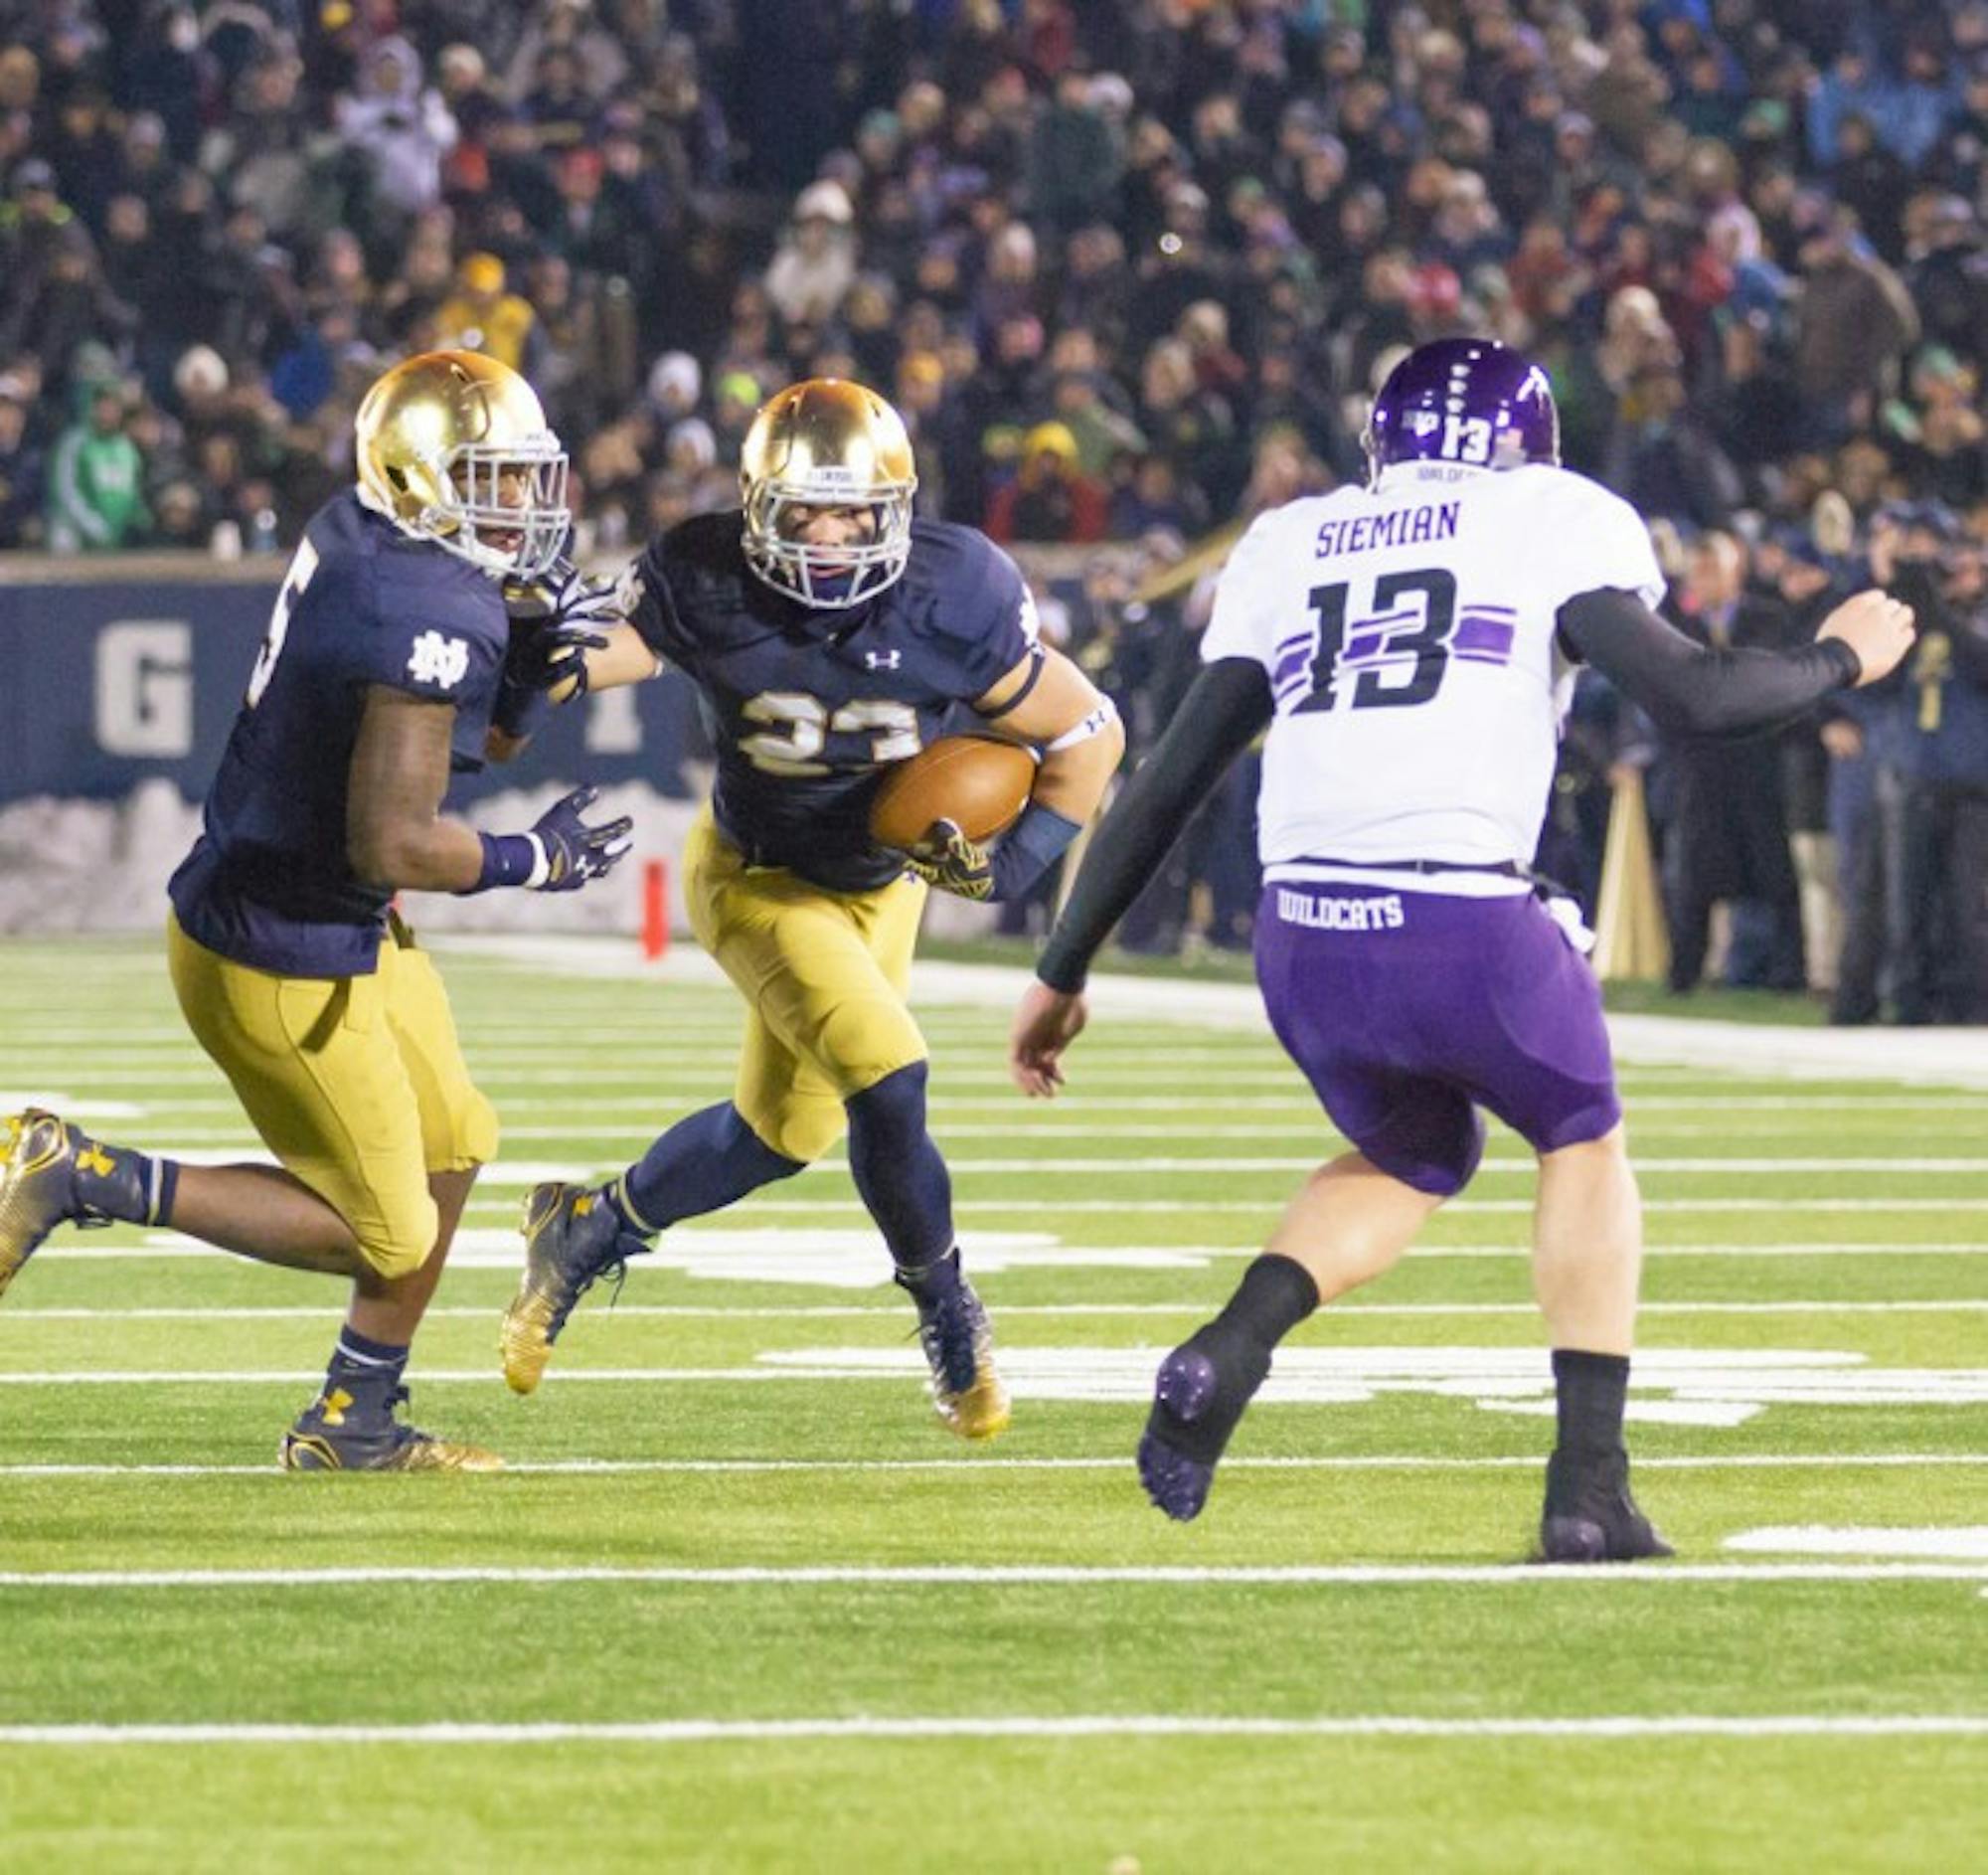 Irish junior safety Drue Tranquill heads upfield after recovering a fumble against Northwestern on Nov. 15, 2014.